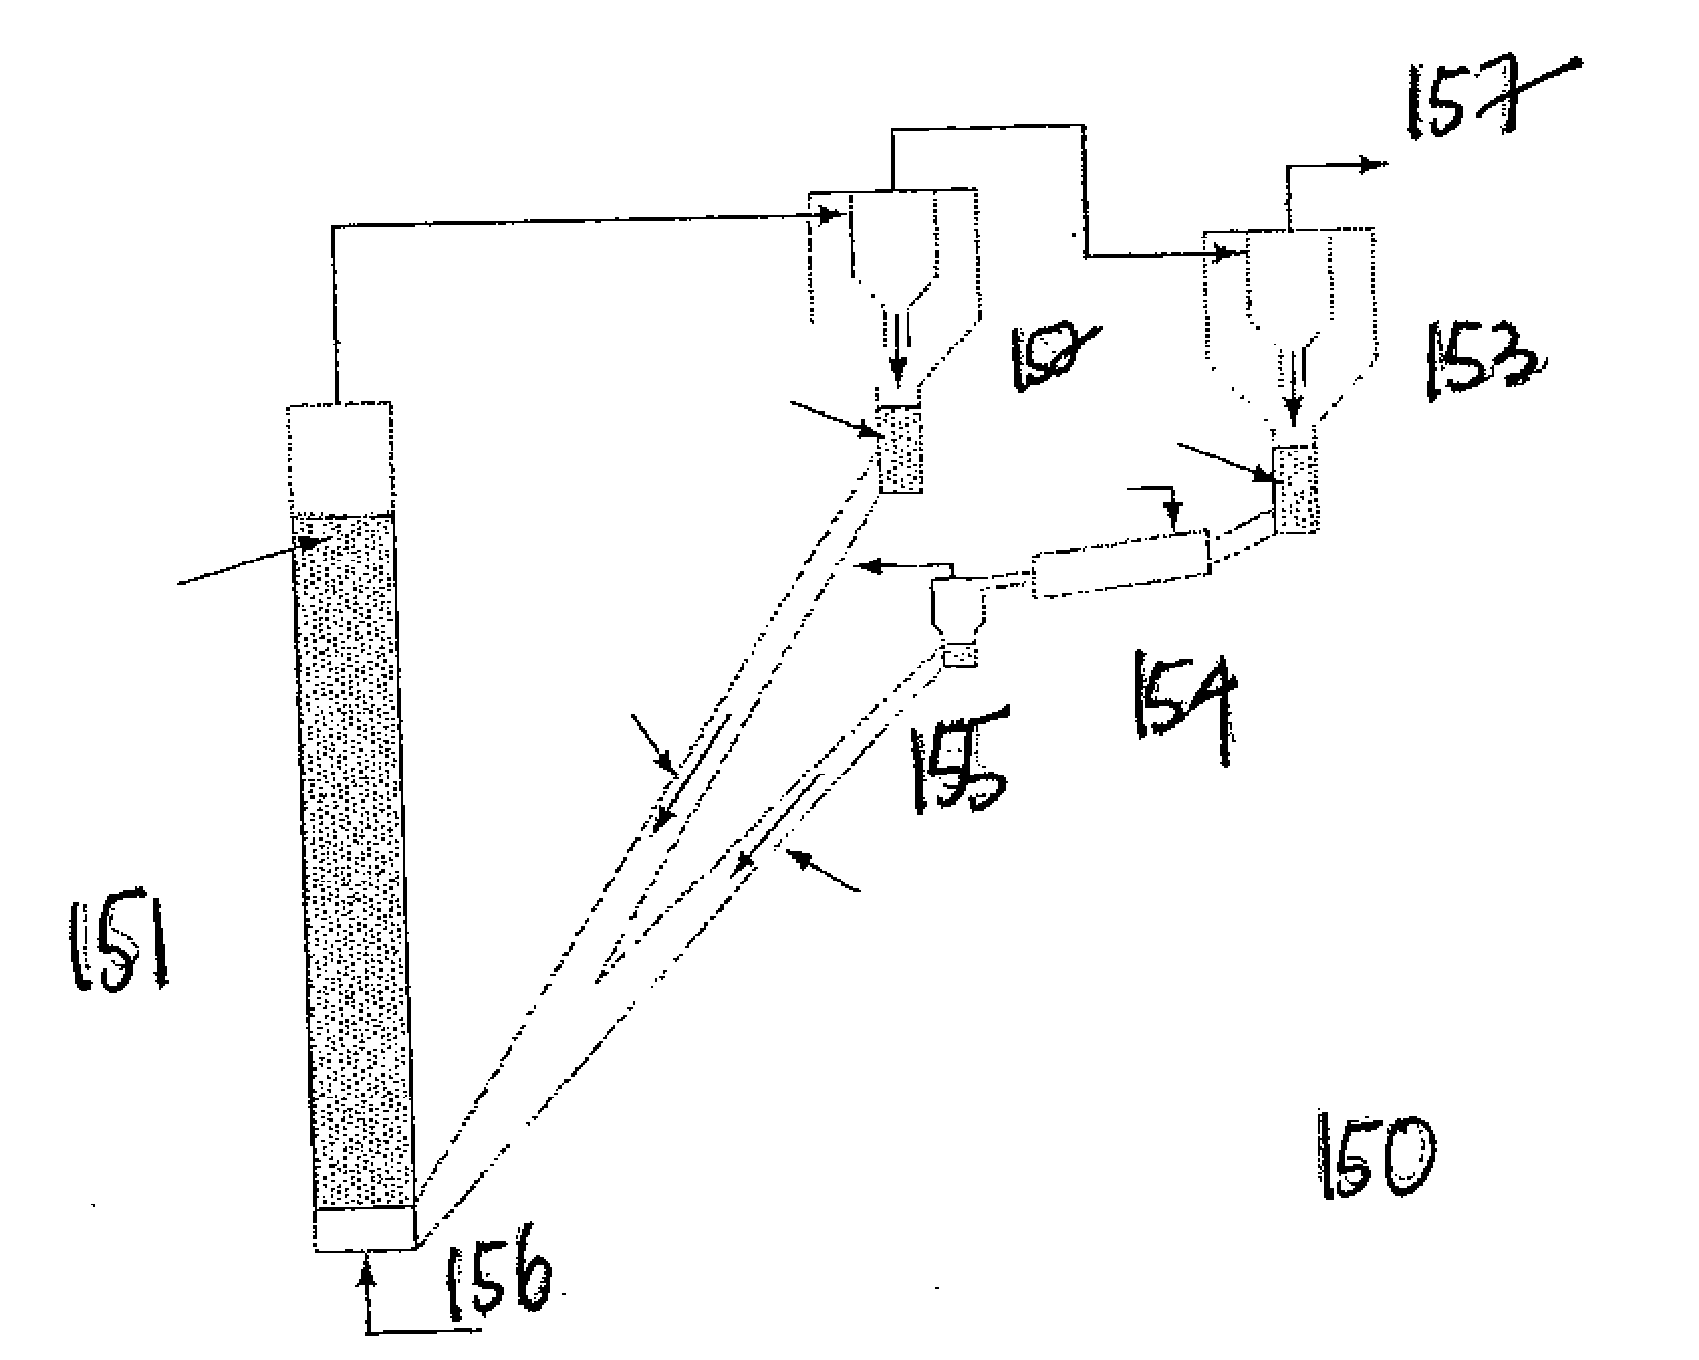 Fluidized Bed System for Single Step Reforming for the Production of Hydrogen